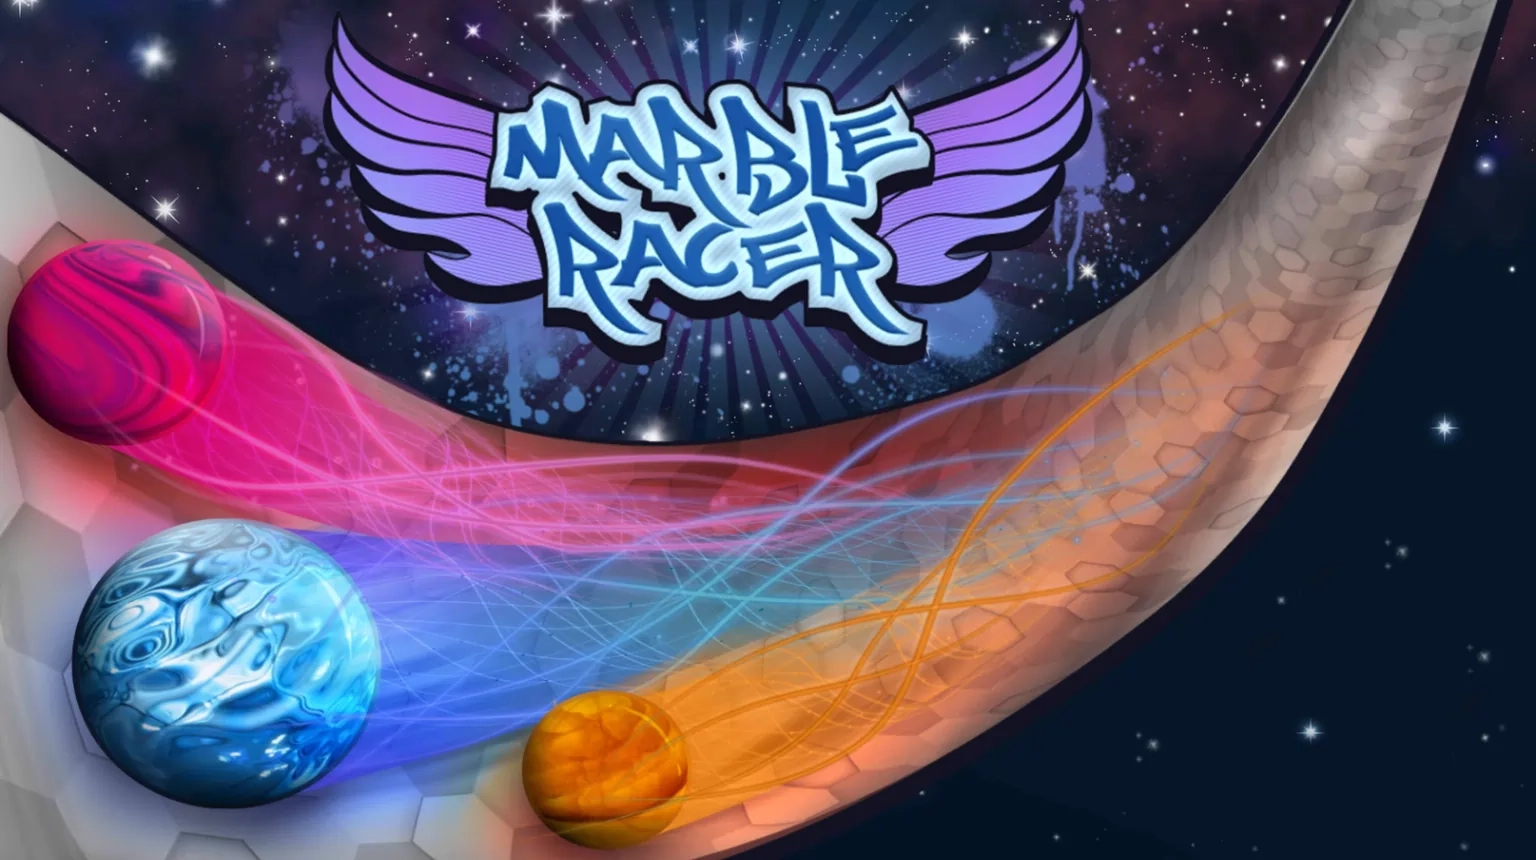 Marble Racer